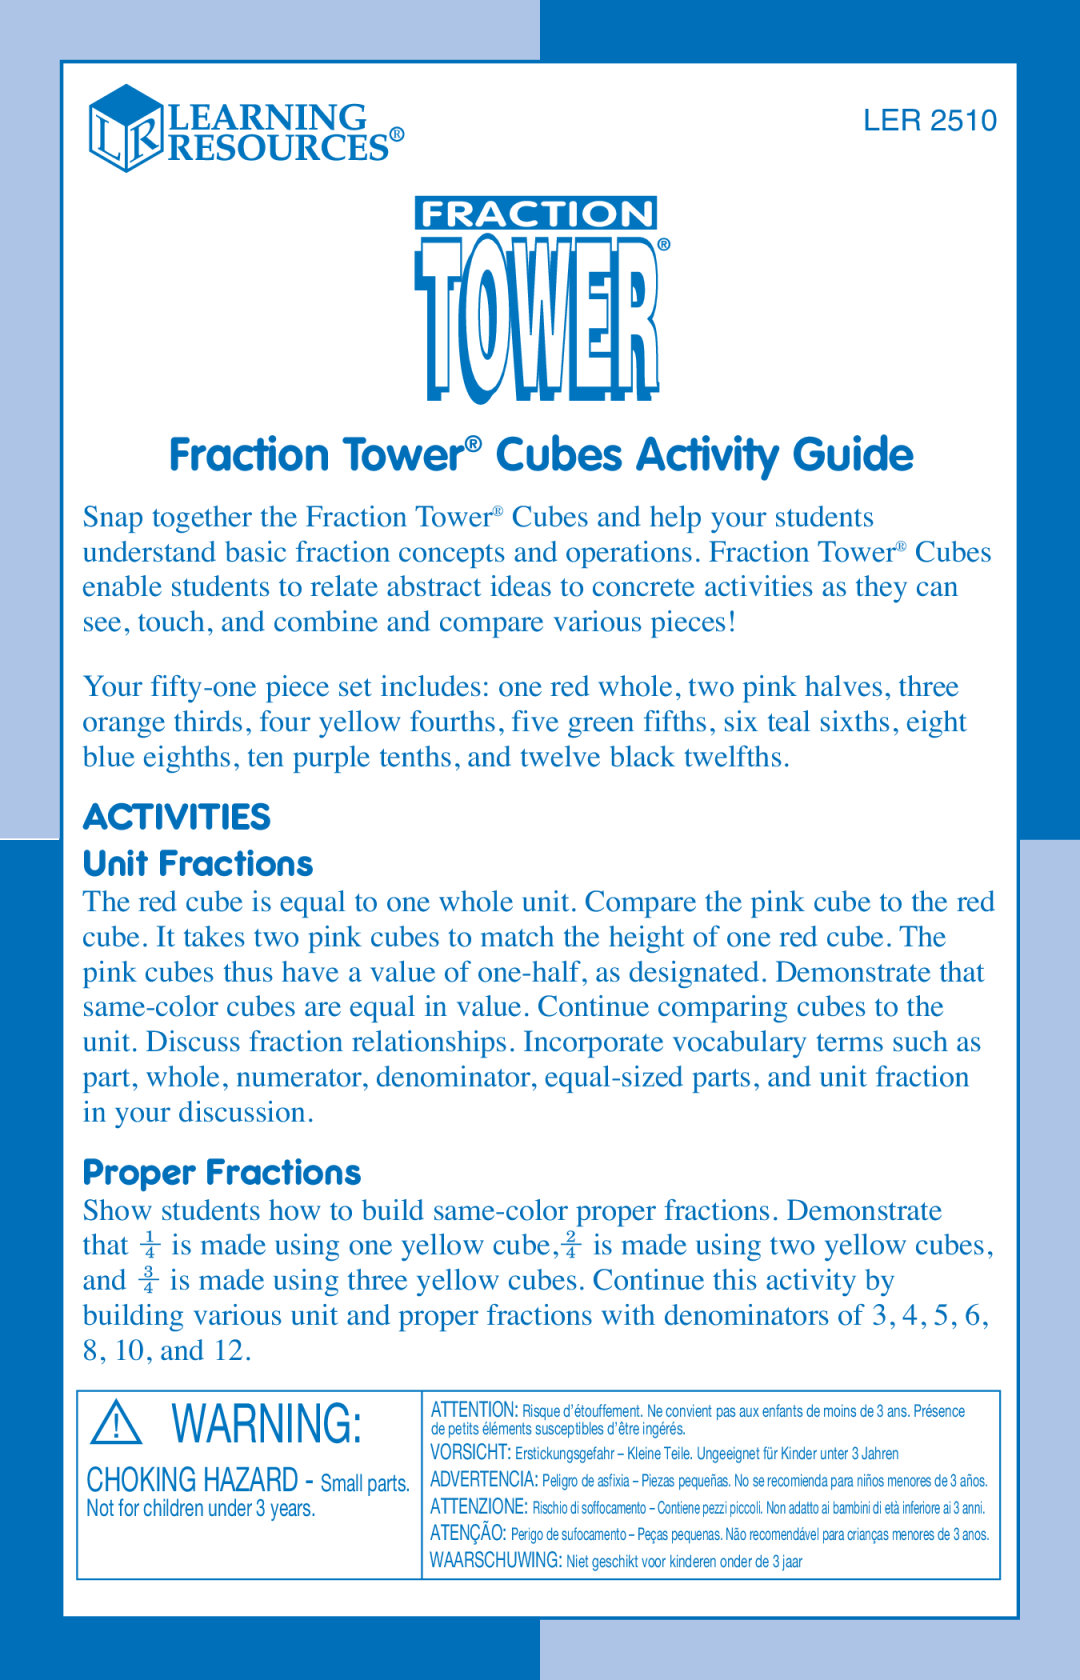 Learning Resources LER 2510 manual Activities, Fraction Tower Cubes Activity Guide 